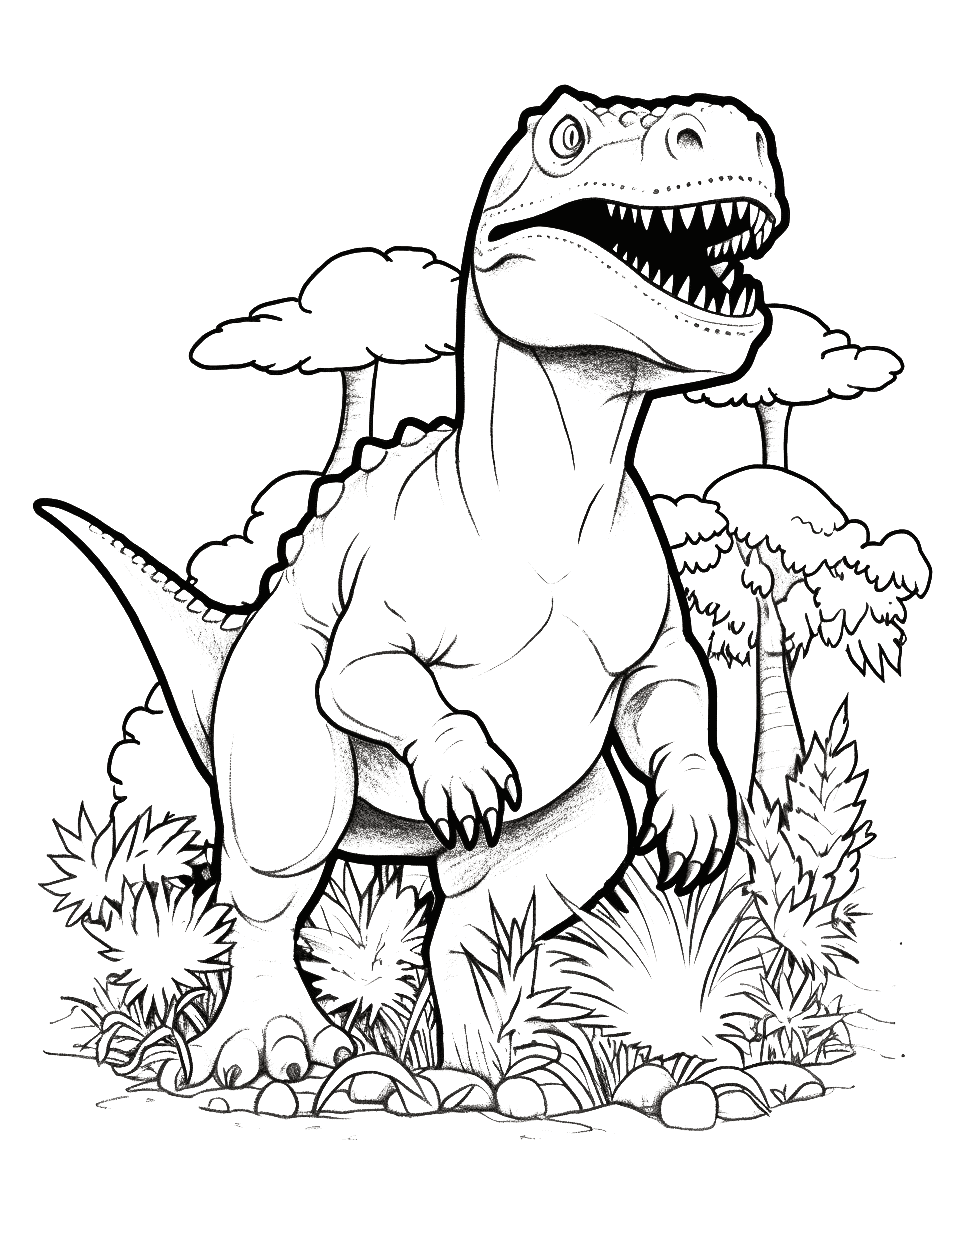 T-Rex Chase Dinosaur Coloring Page - A T-Rex chasing smaller dinosaurs through the jungle.